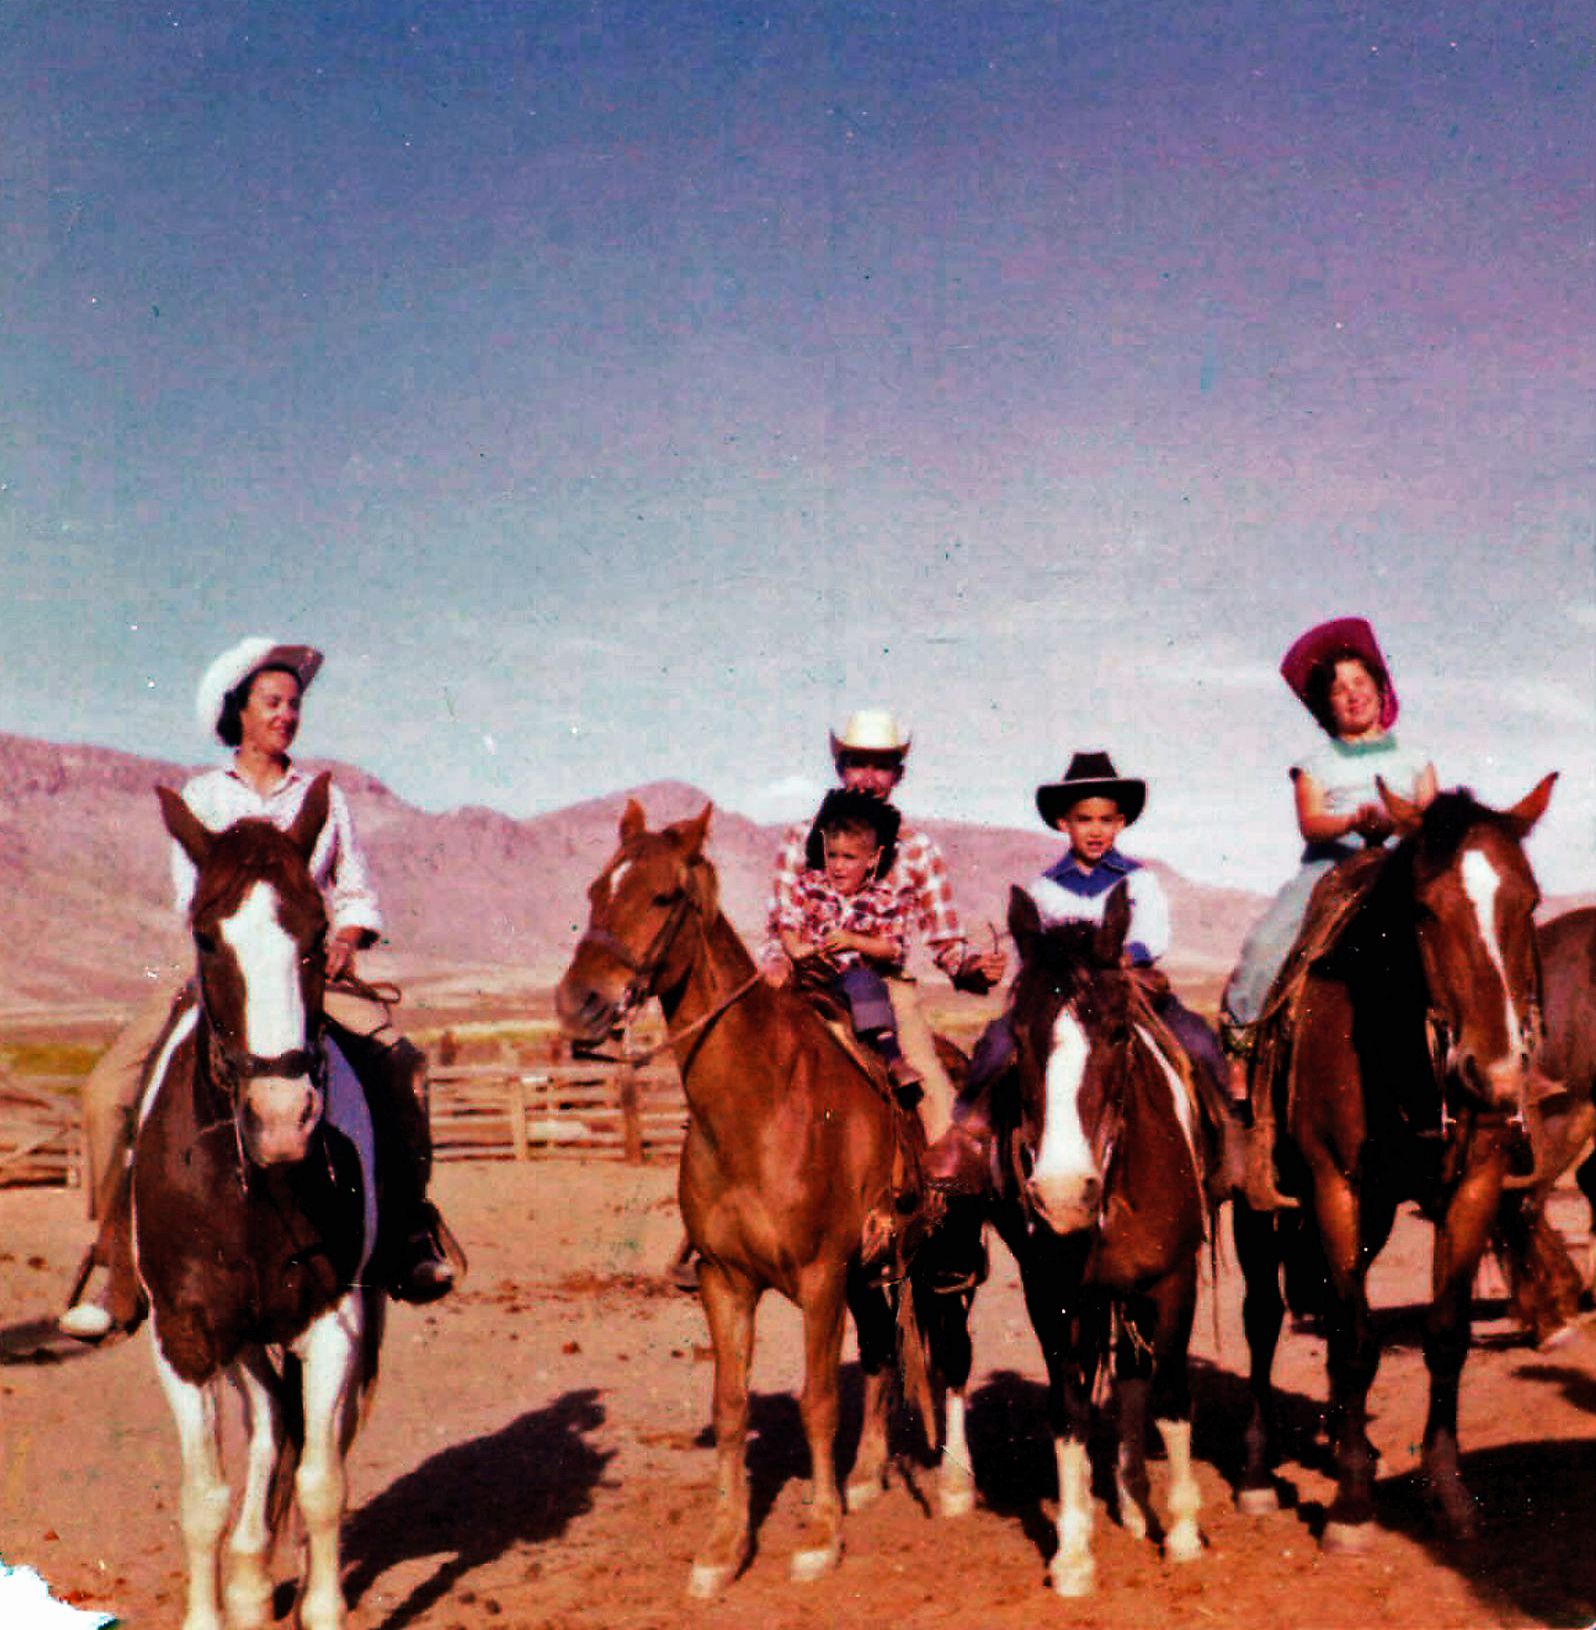 David Strip (center with a blue bandanna) with (left to right) his mother, father, brother Michael, and sister Lynn in 1957, on a family vacation to a dude ranch in Demming, New Mexico.